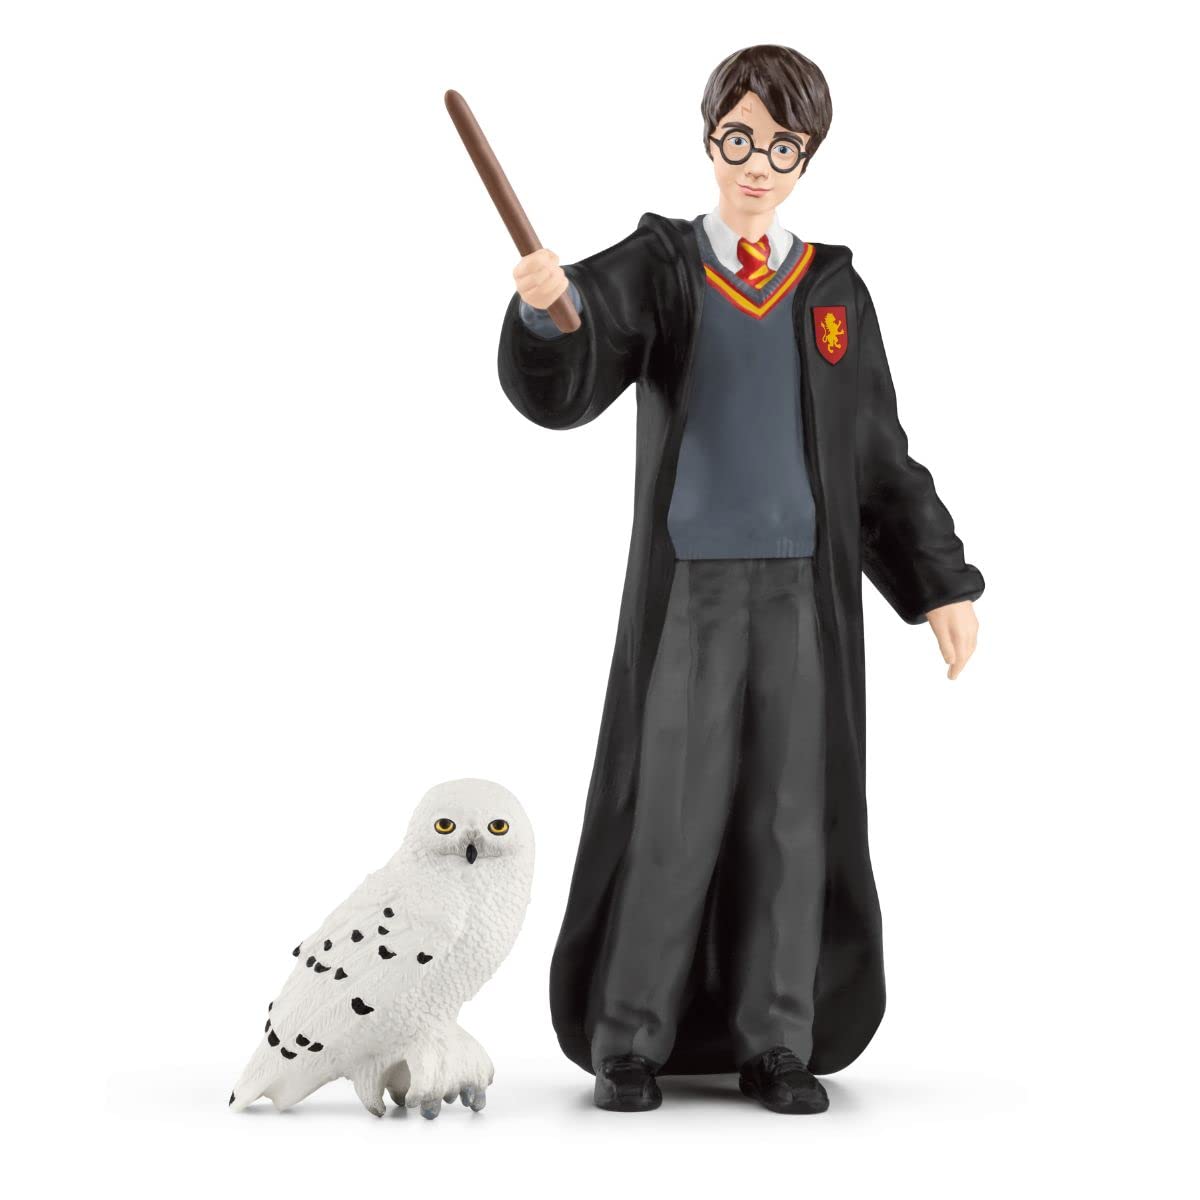 Schleich Wizarding World™ of Harry Potter 2-Piece Set with Harry Potter™ & Hedwig™ Collectible Figurines for Kids Ages 6+